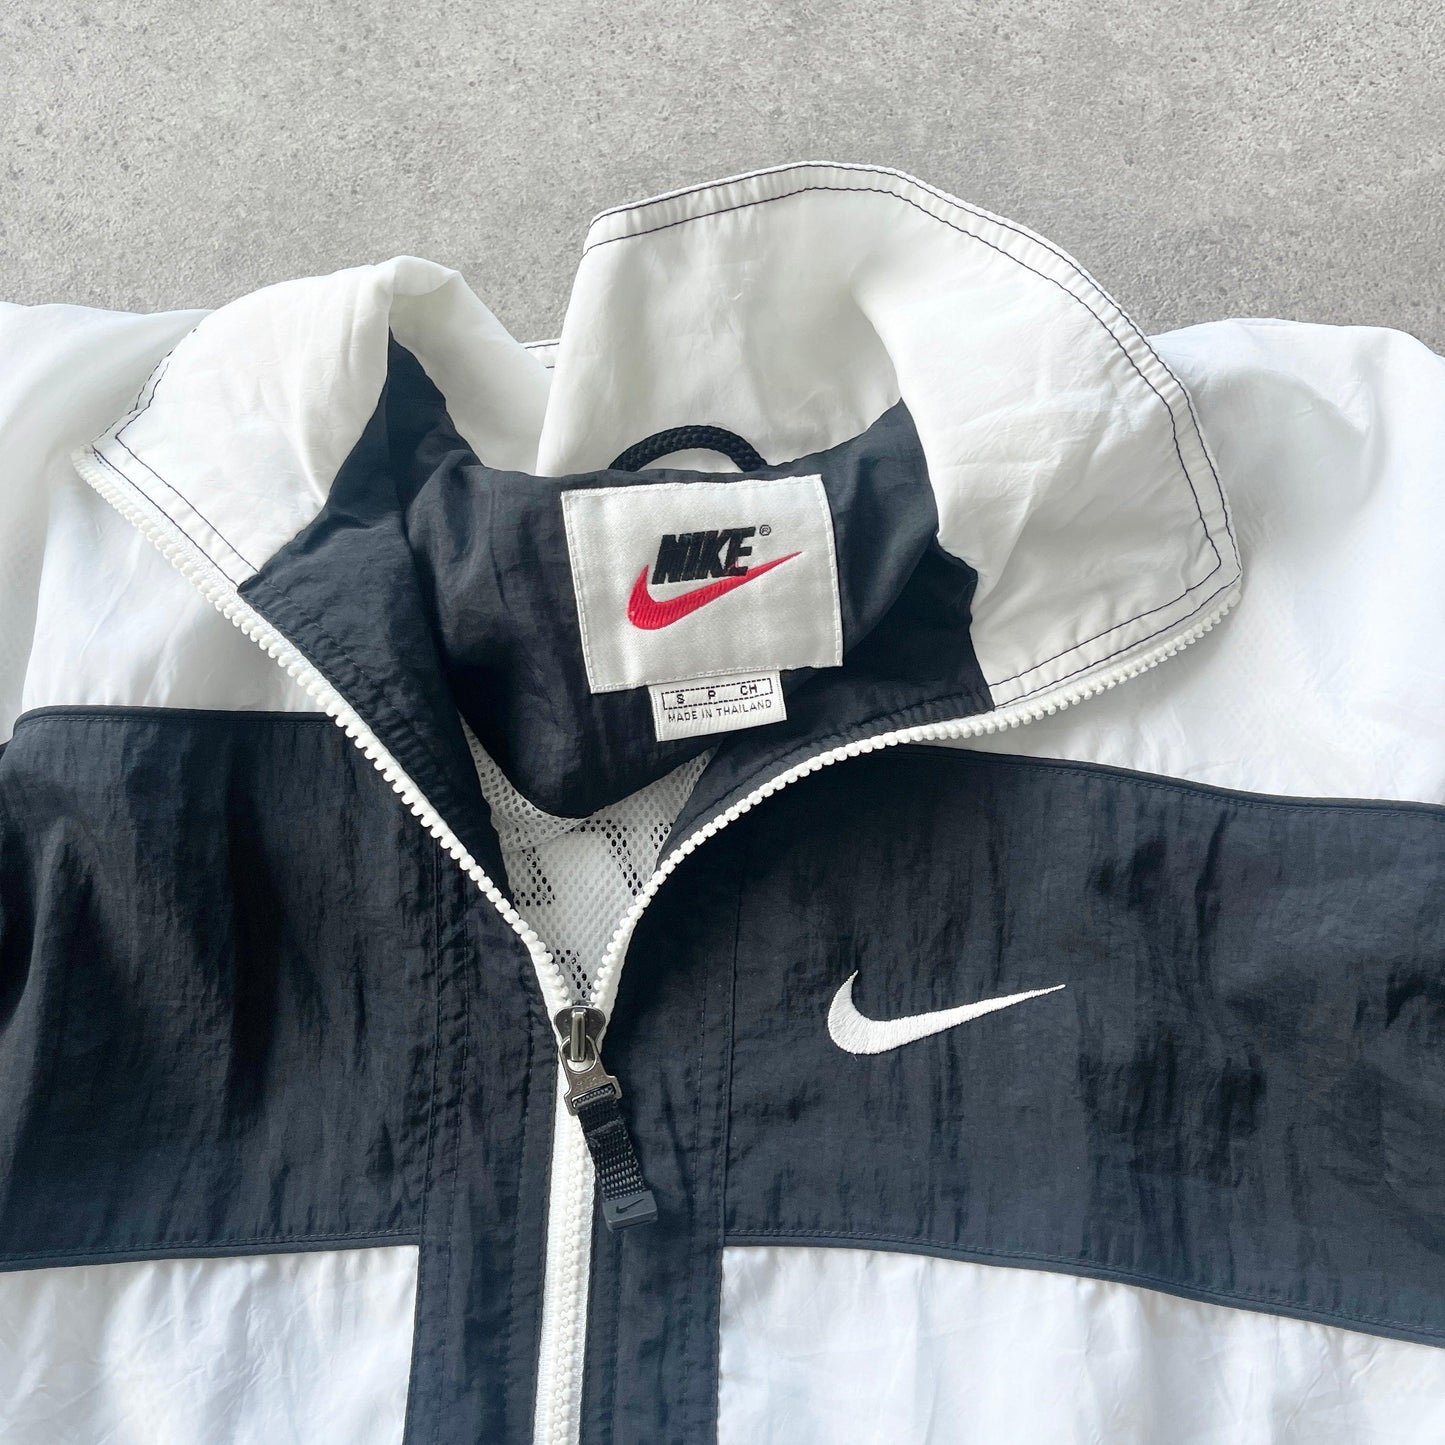 Nike 1990s lightweight convertible spellout shell jacket (S) - Known Source